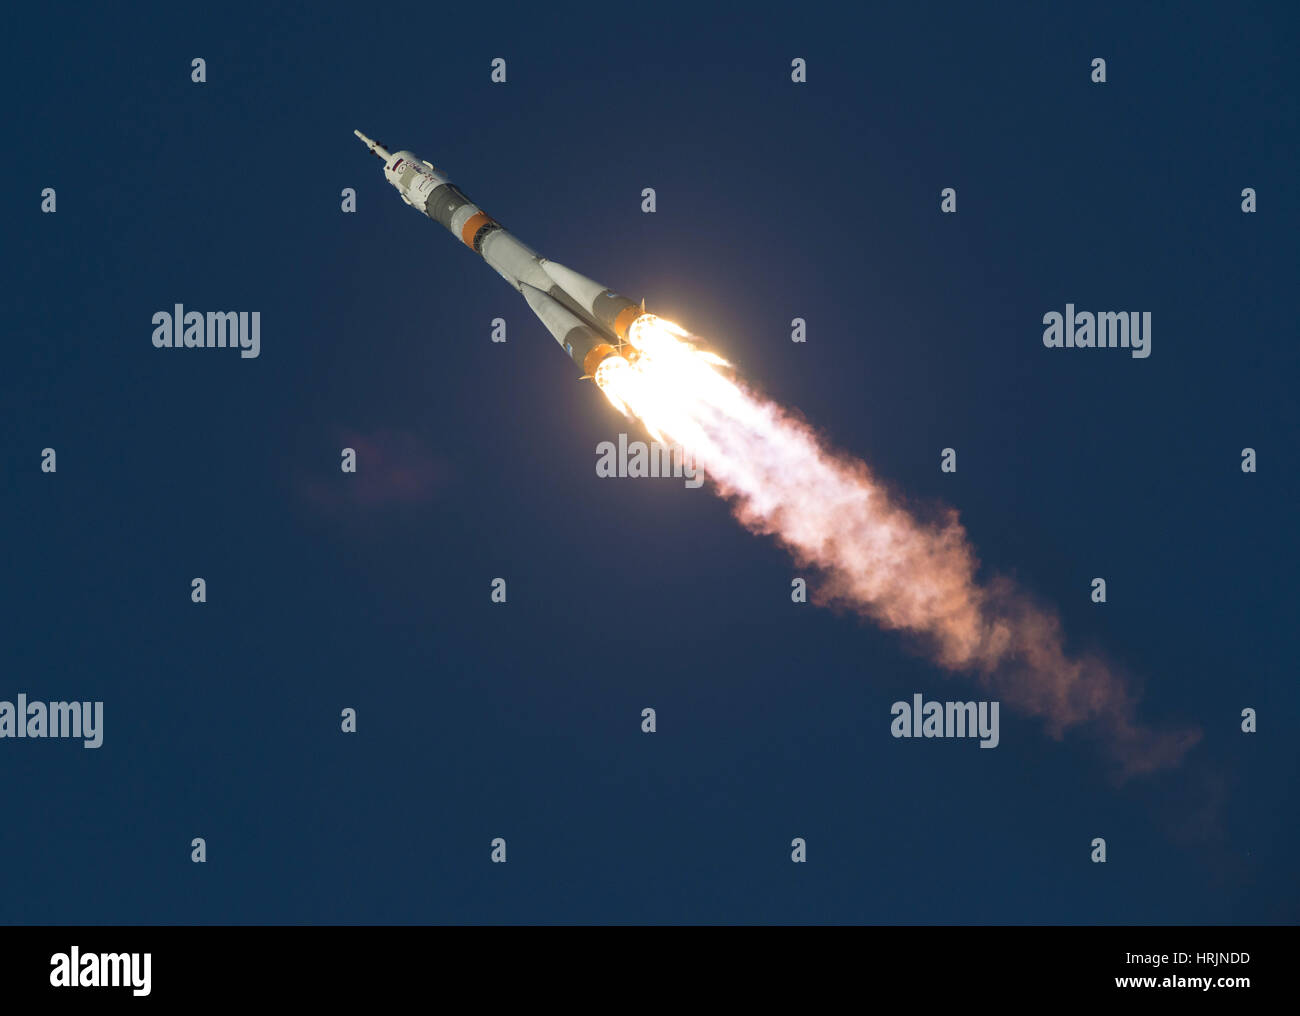 Expedition 46 Soyuz Launch to the ISS Stock Photo